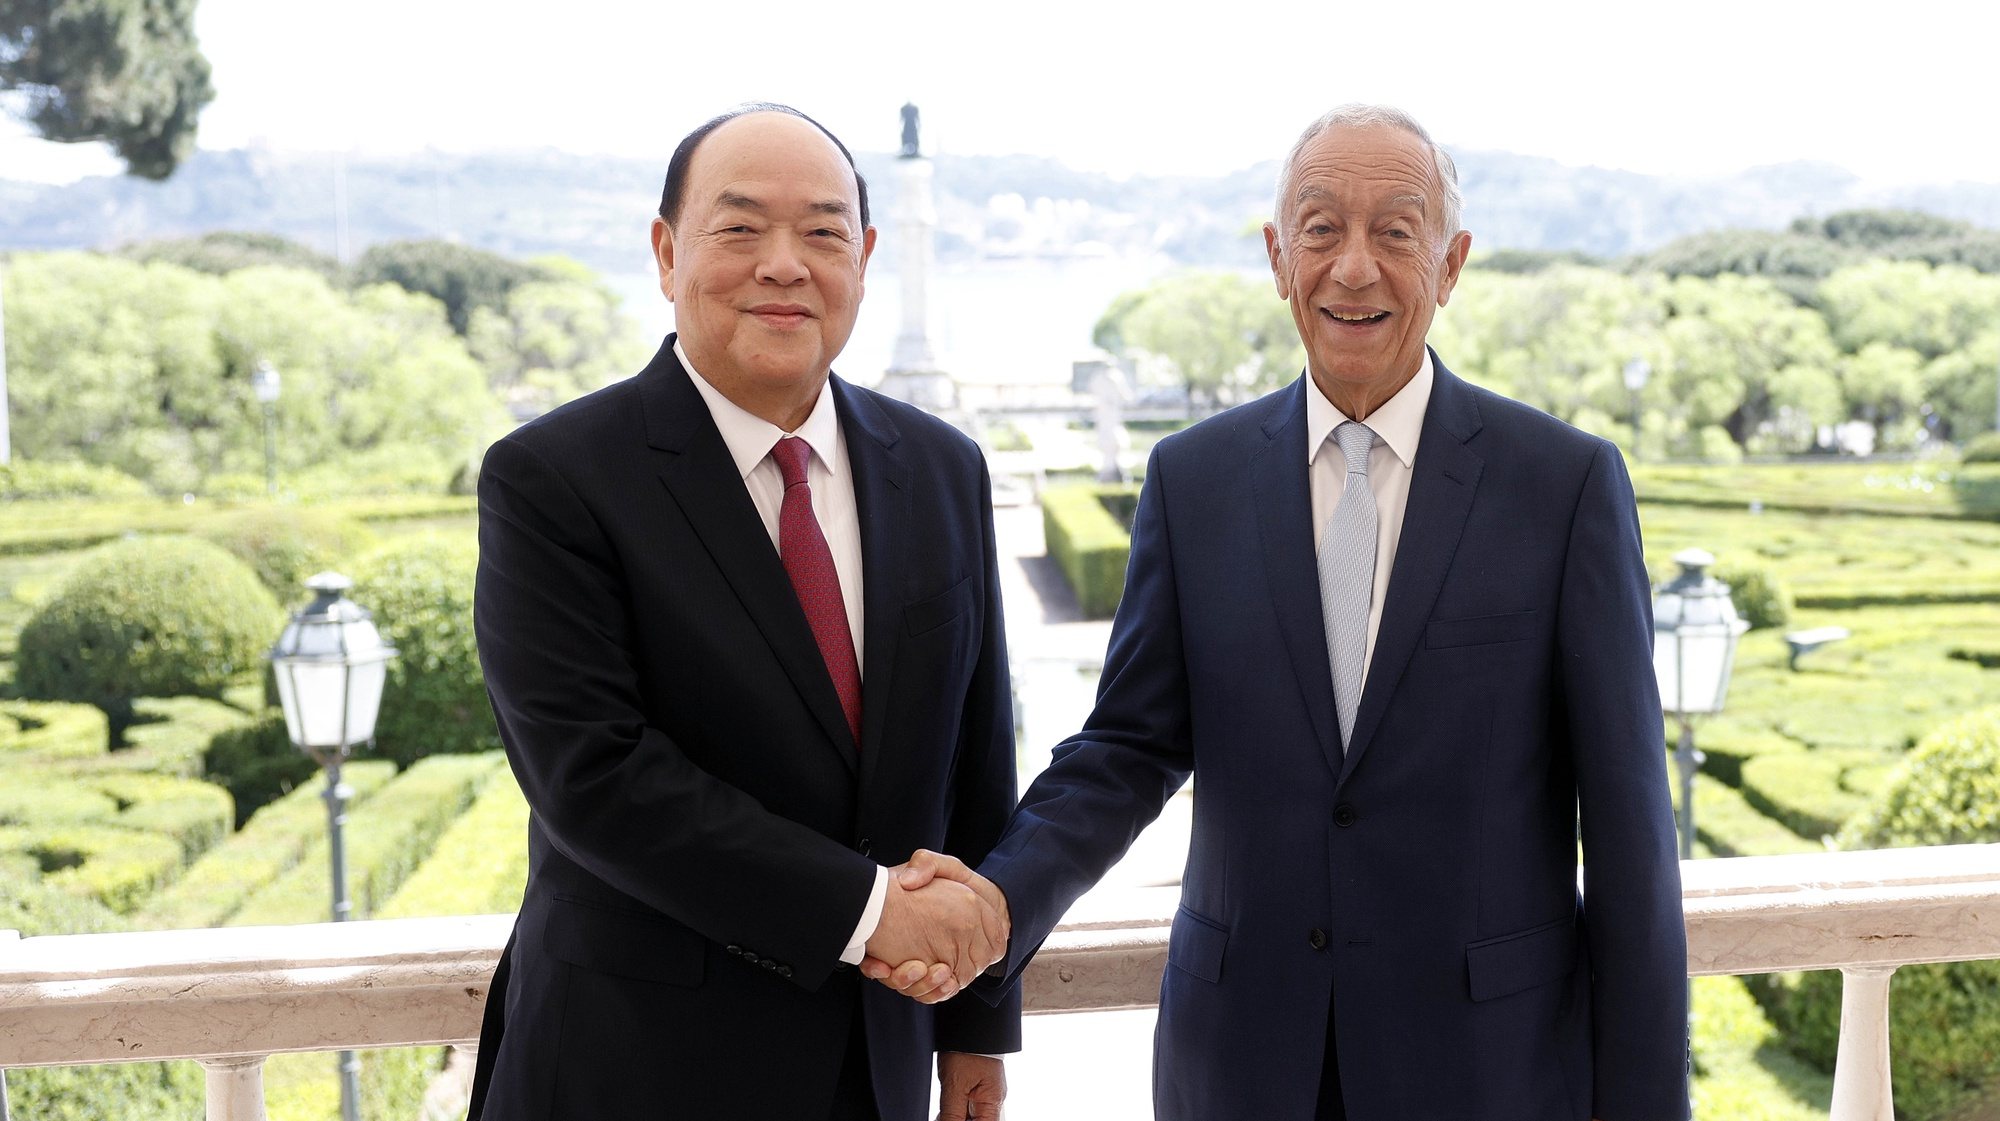 The President of the Republic, Marcelo Rebelo de Sousa (R), greets the Chief Executive of the Macau Special Administrative Region (MSAR), Ho Iat Seng (L), before an audience at the Belem Palace in Lisbon, Portugal, 20th April 2023. ANTONIO PEDRO SANTOS/LUSA